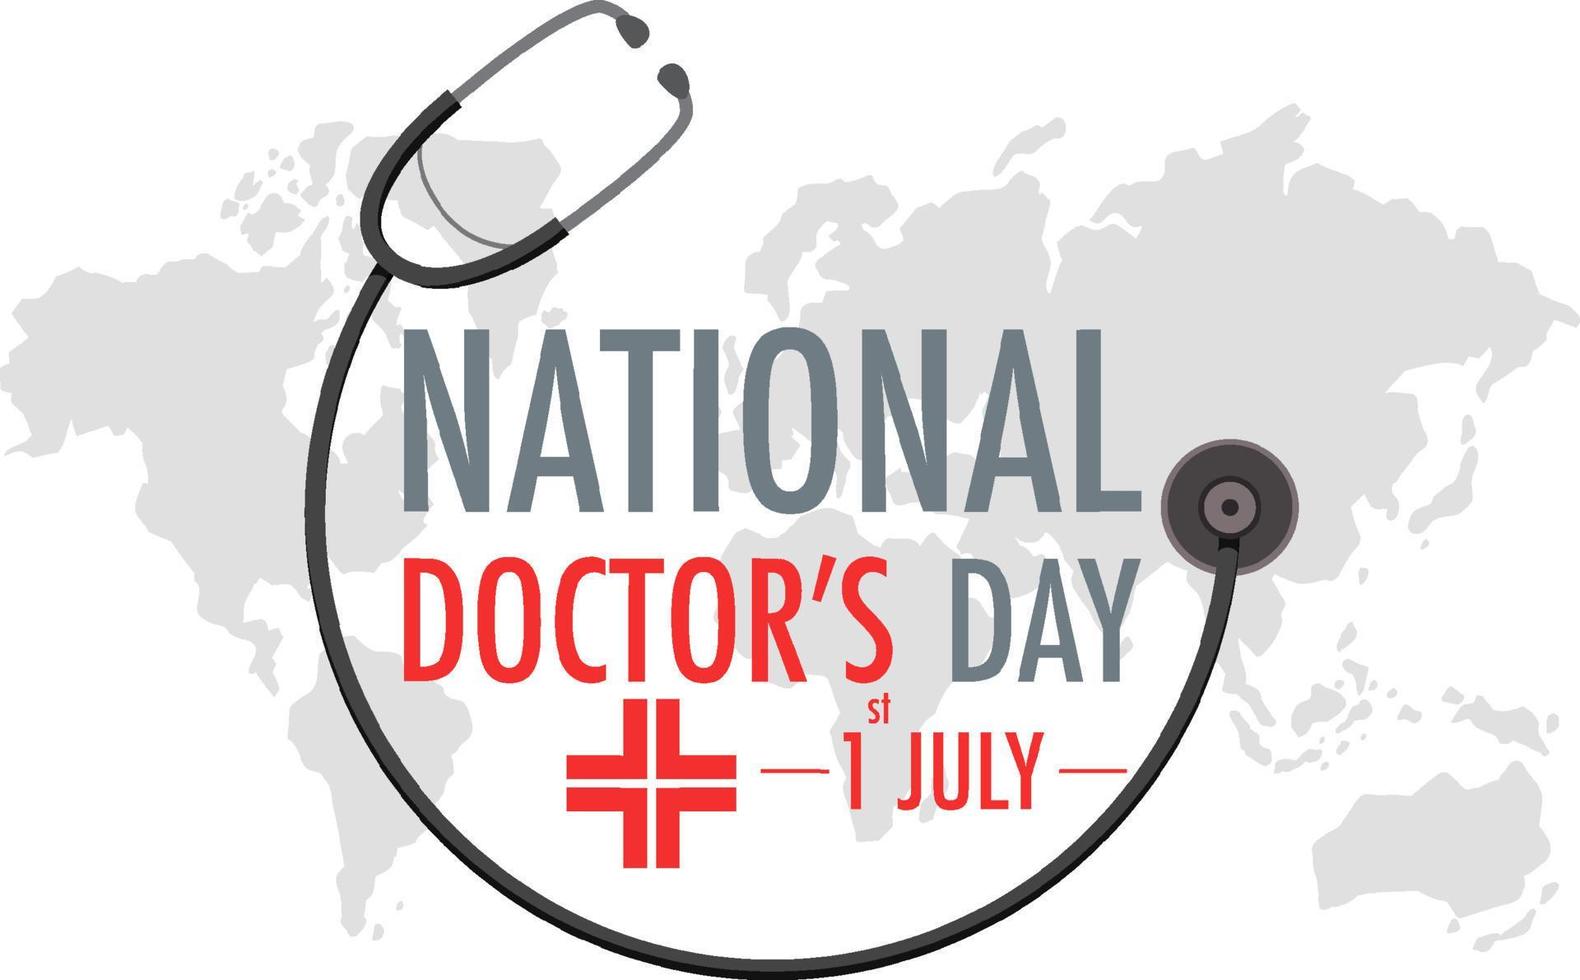 National doctor day in July logo vector